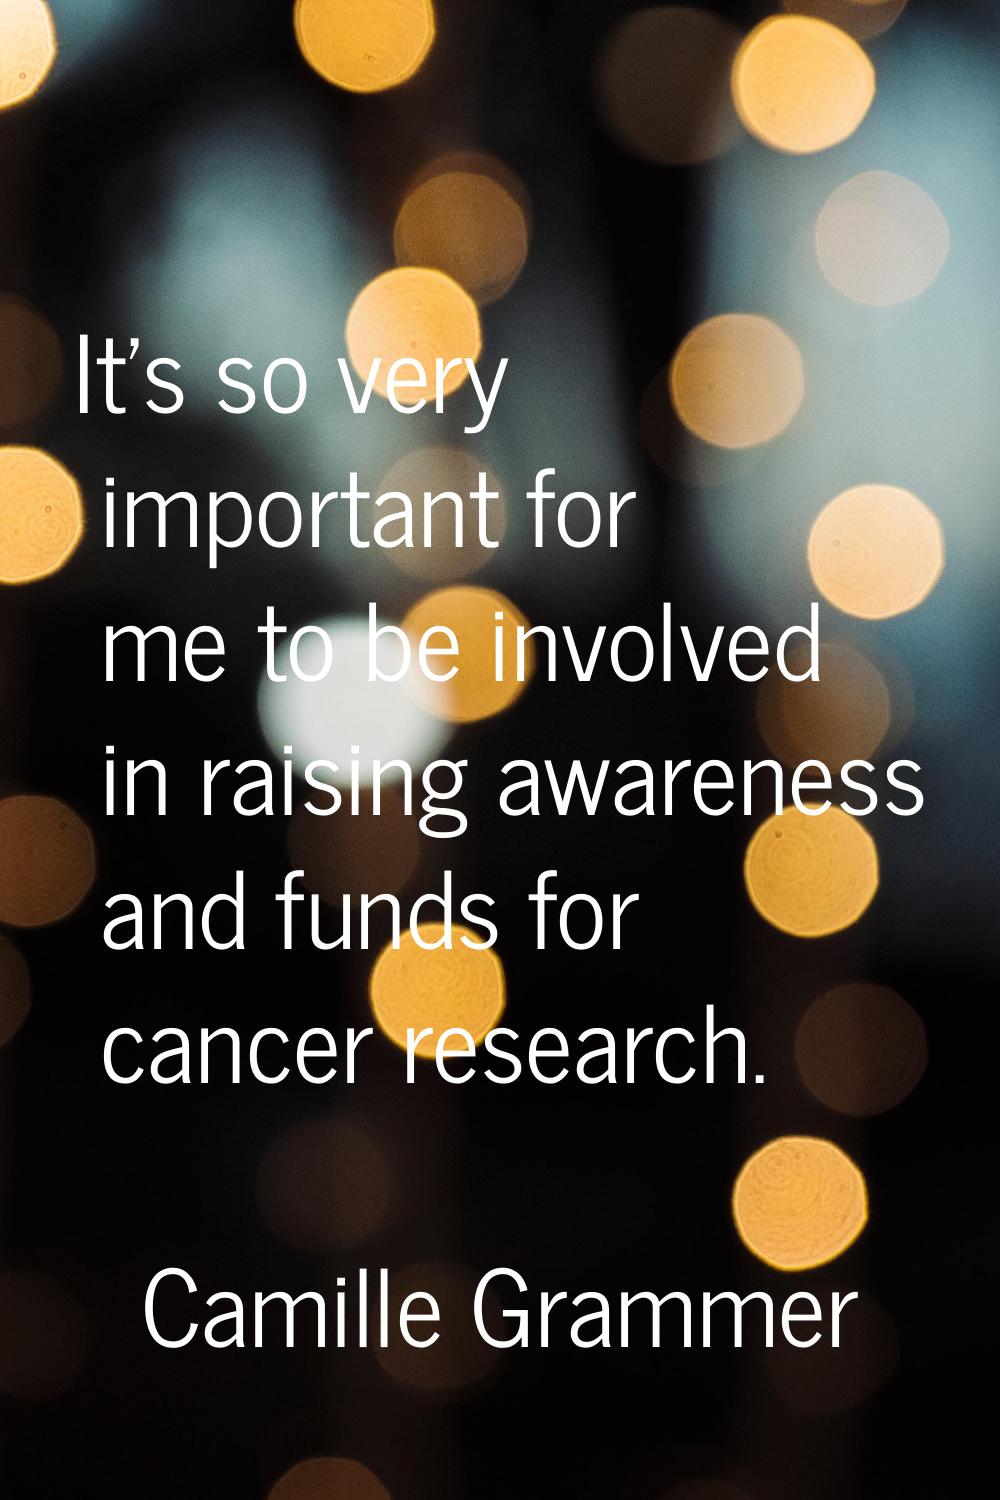 It's so very important for me to be involved in raising awareness and funds for cancer research.